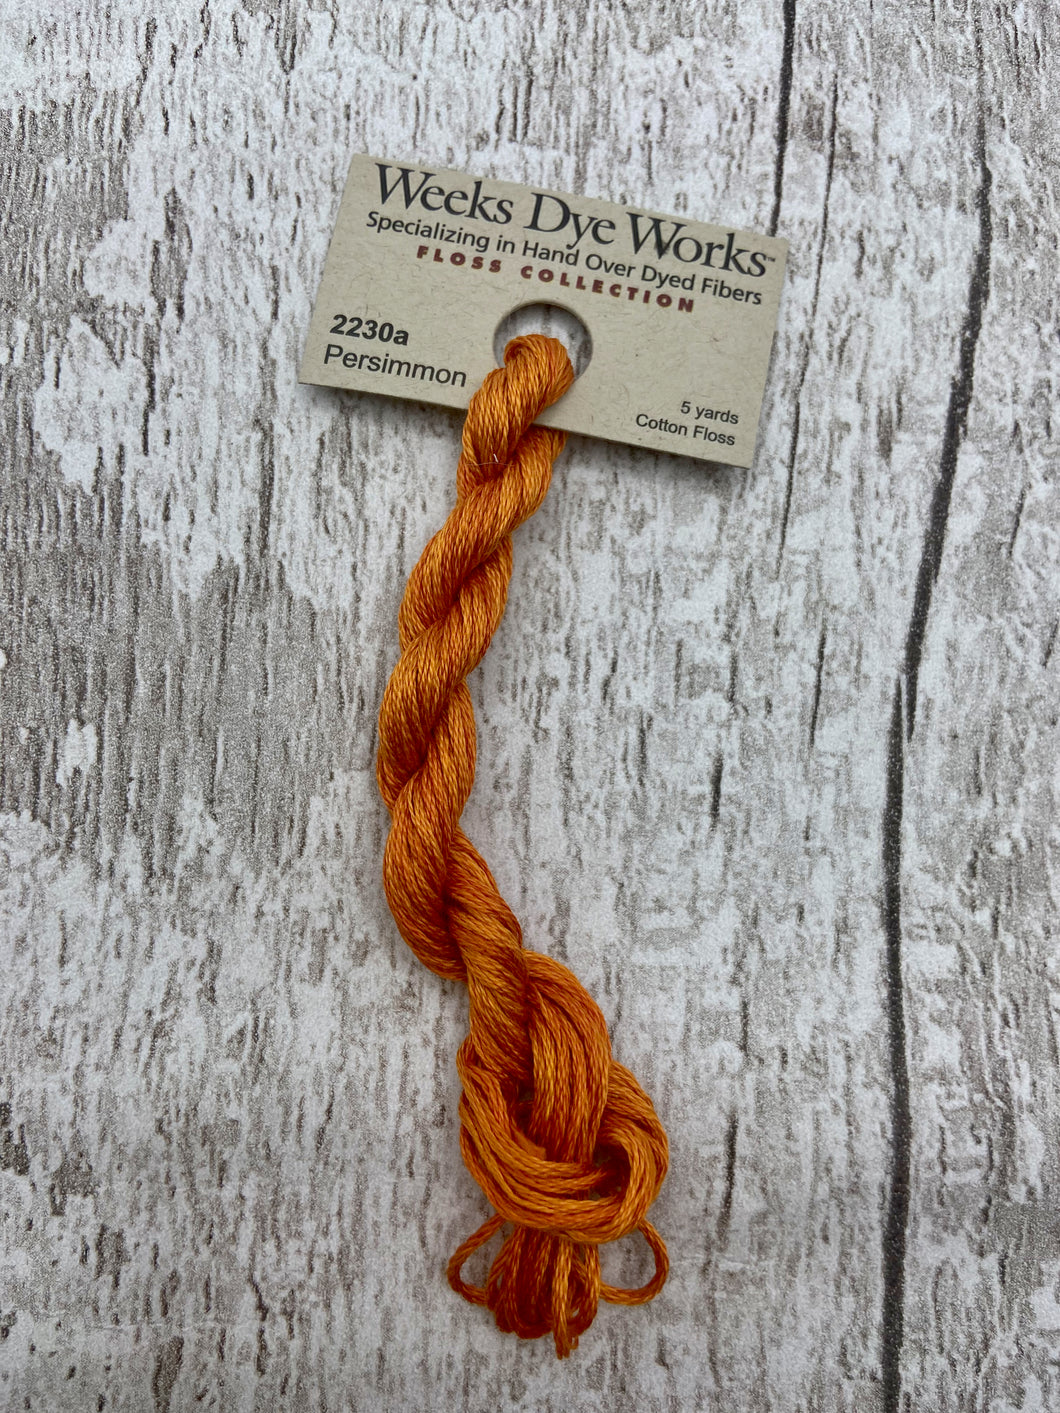 Persimmon (#2230a) Weeks Dye Works 6-strand cotton floss